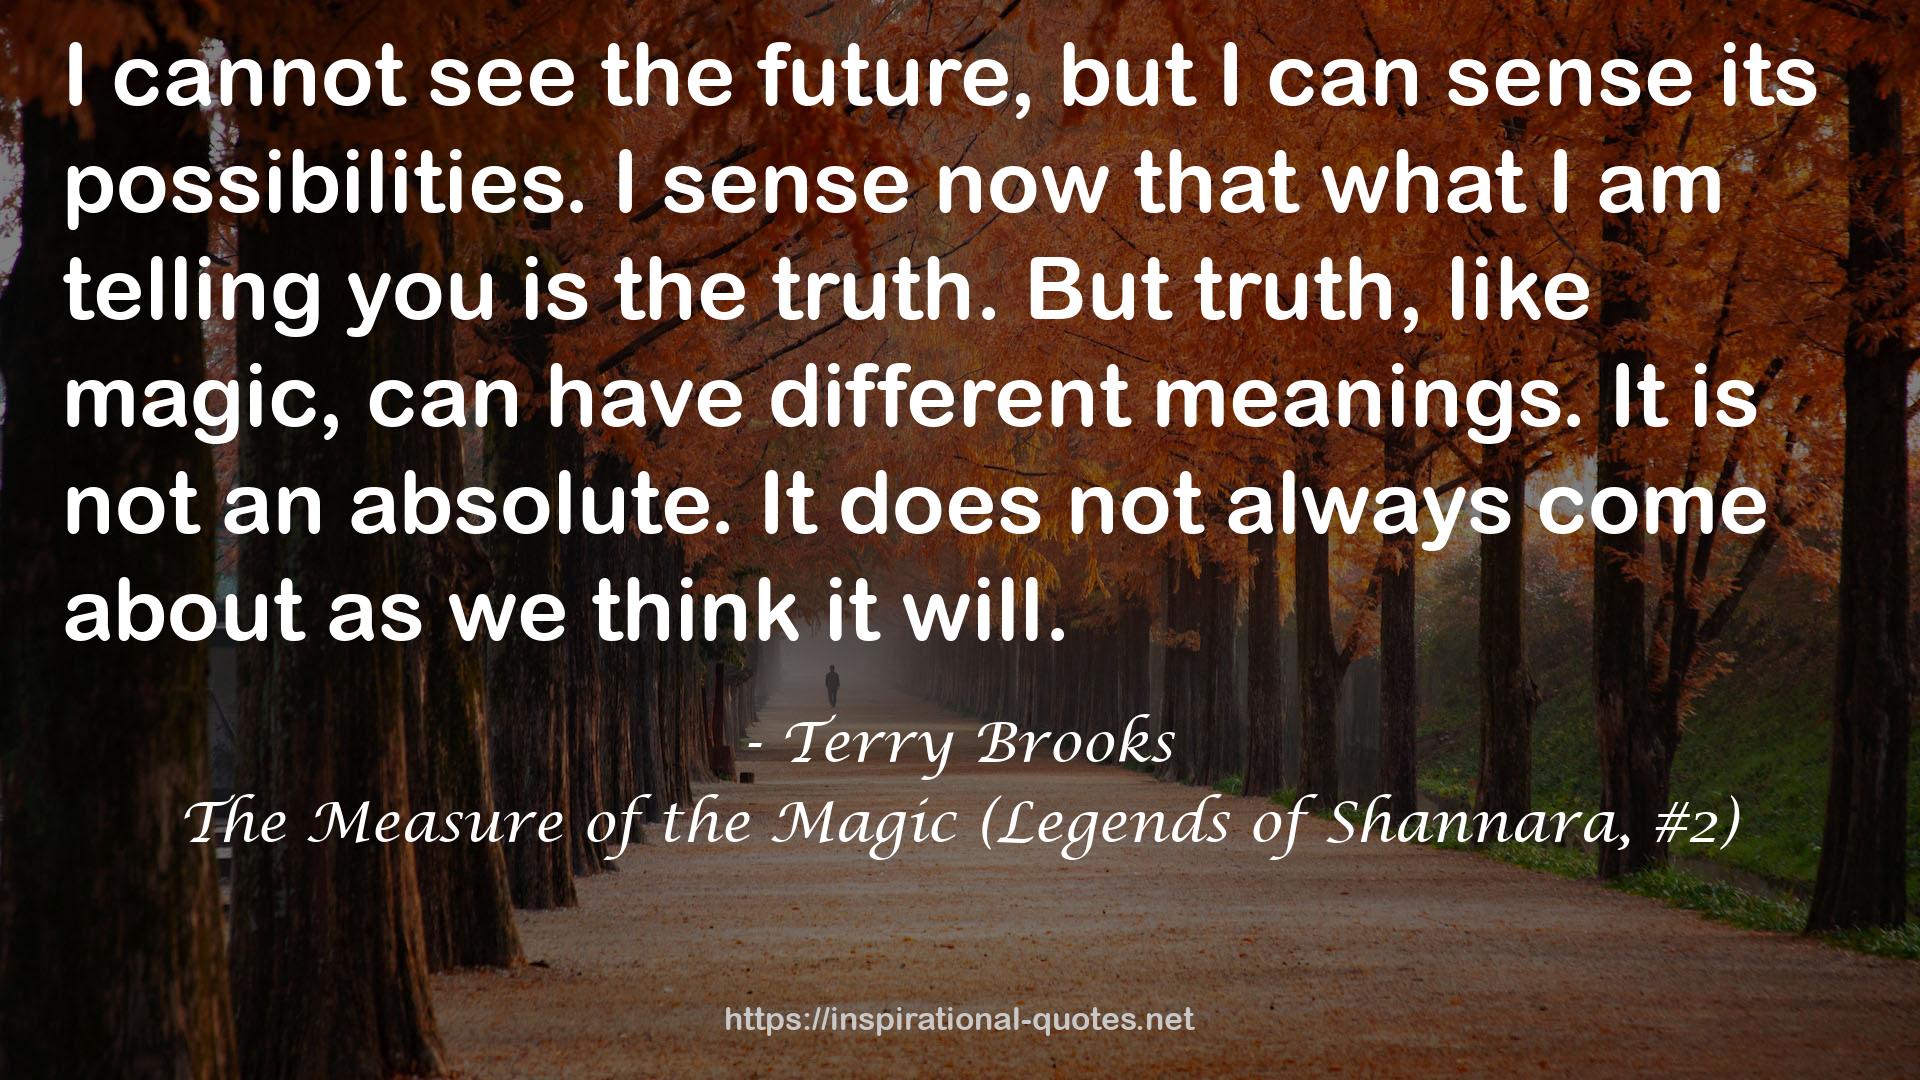 The Measure of the Magic (Legends of Shannara, #2) QUOTES